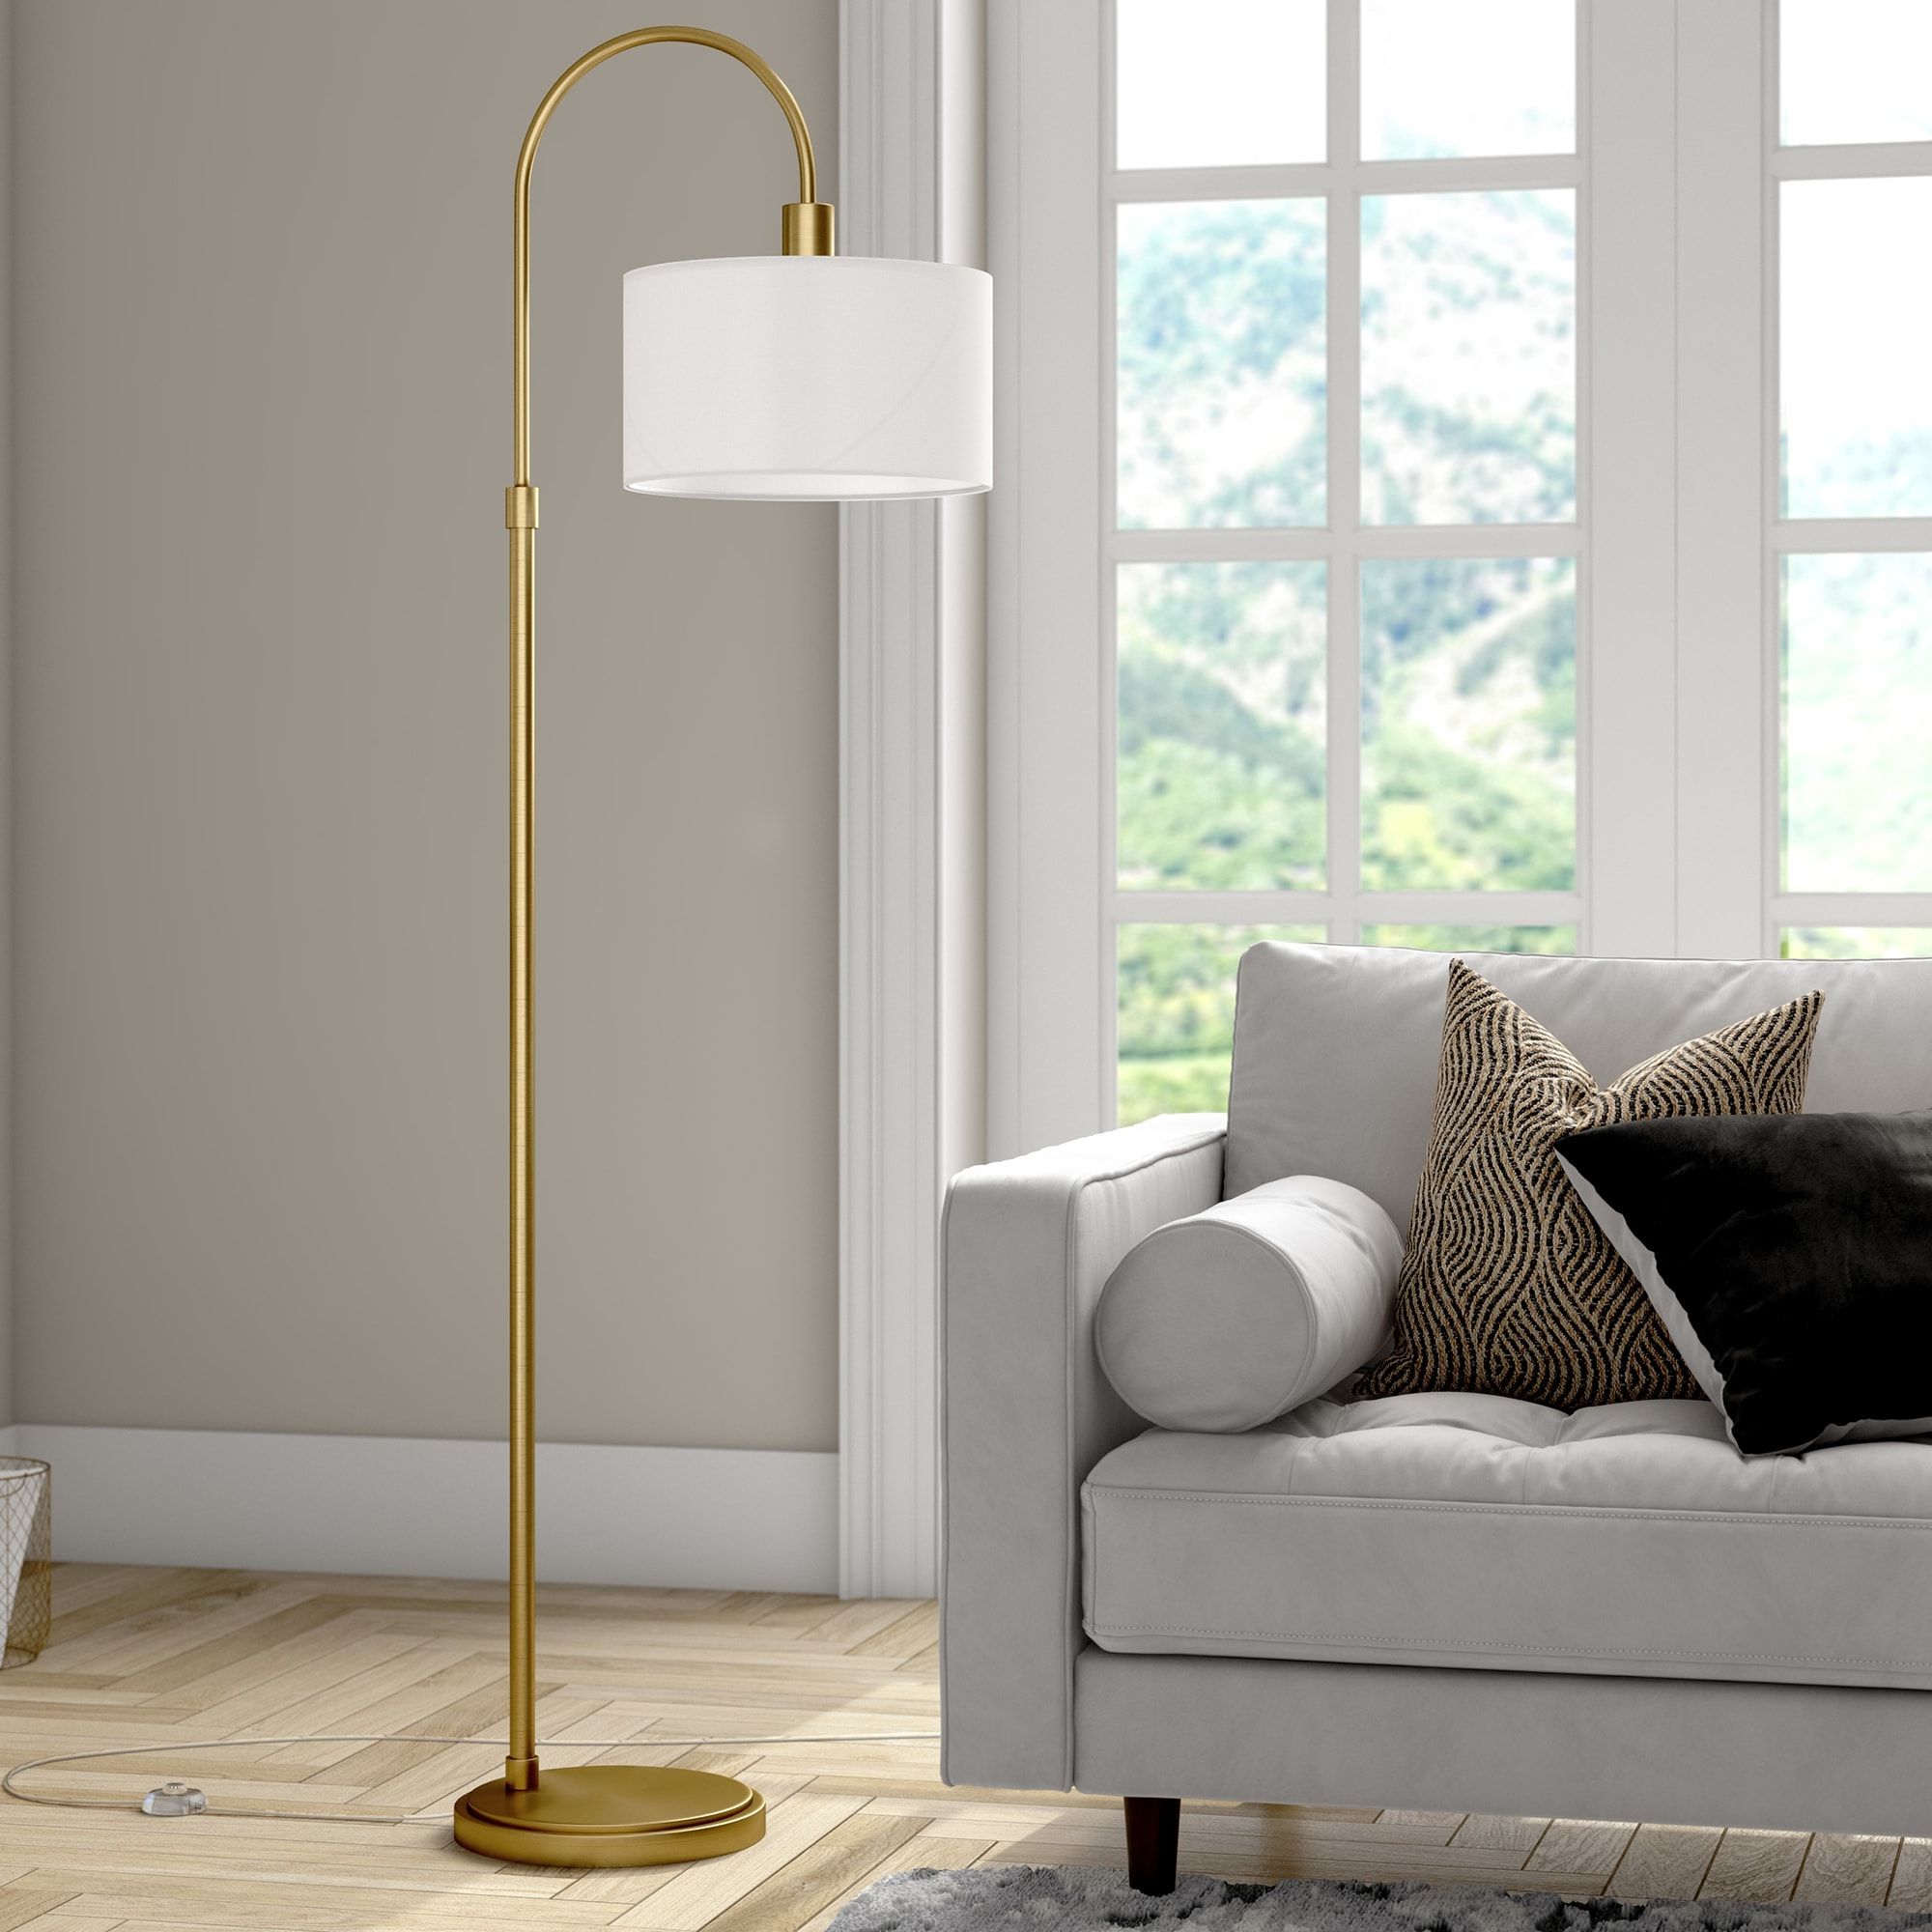 Veronica Arc Floor Lamp – Overstock – 32985670 Throughout Well Known Brass Floor Lamps (View 7 of 15)